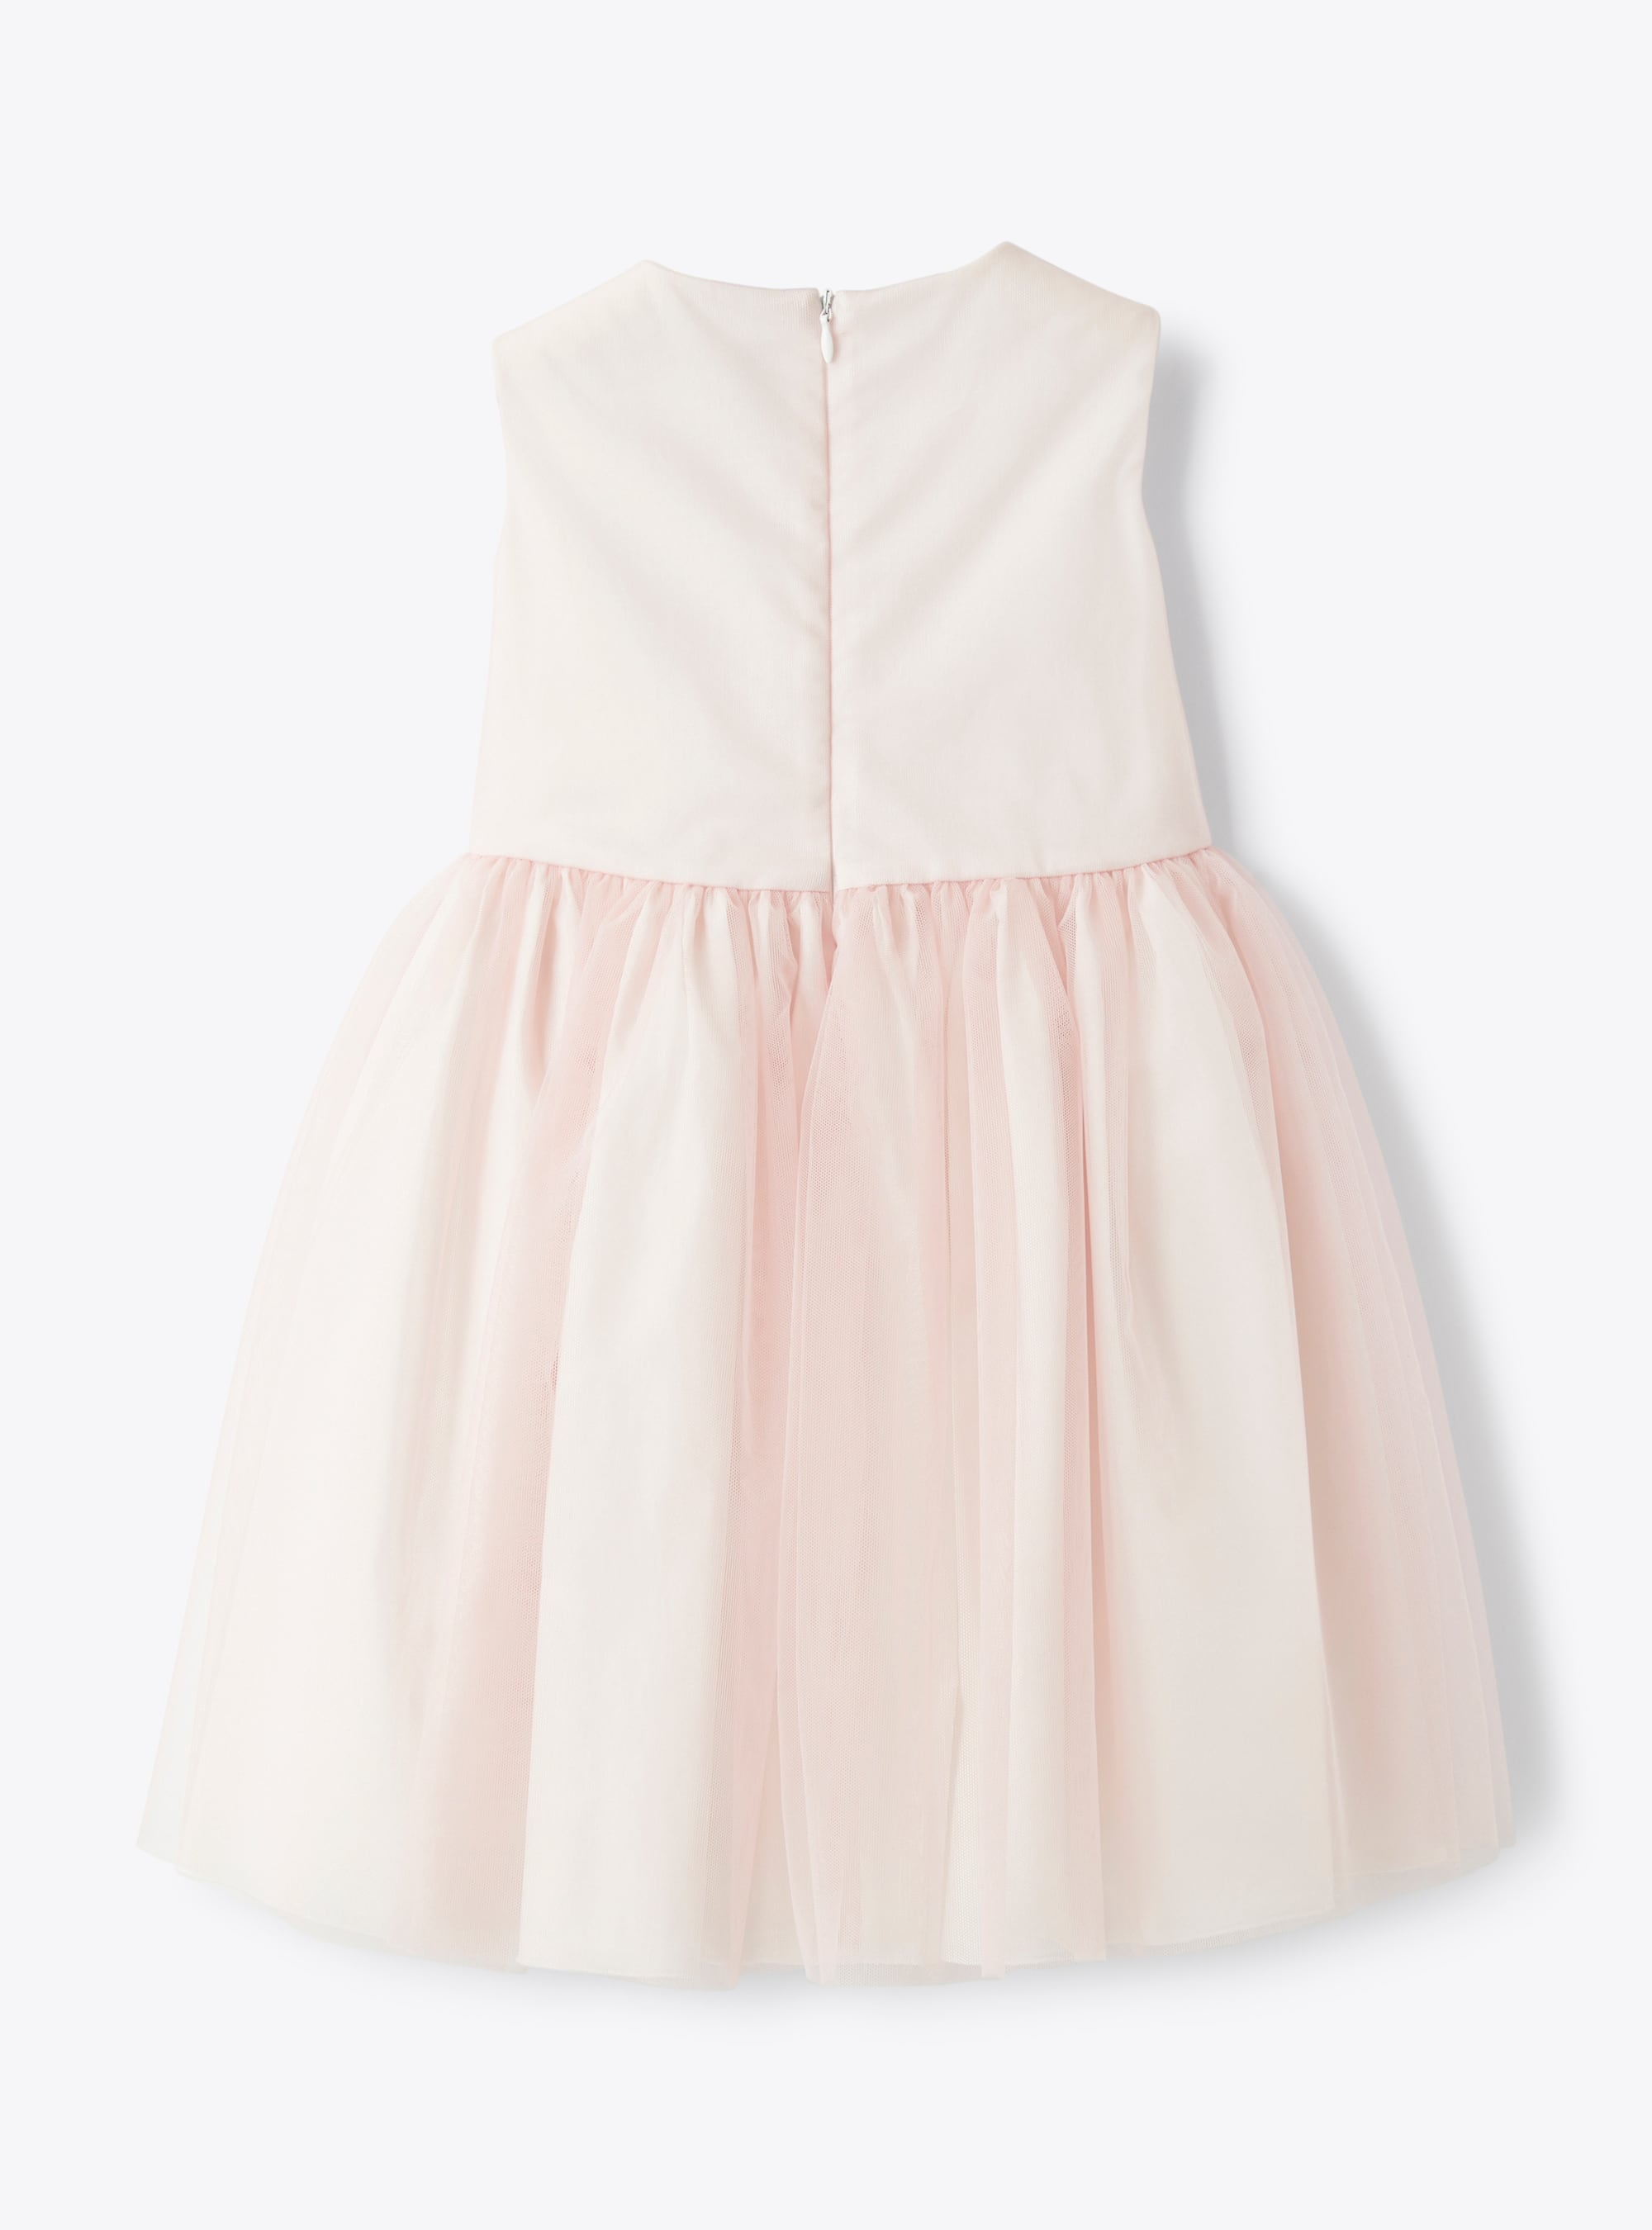 Dress in antique-rose tulle with appliqué flowers - Pink | Il Gufo